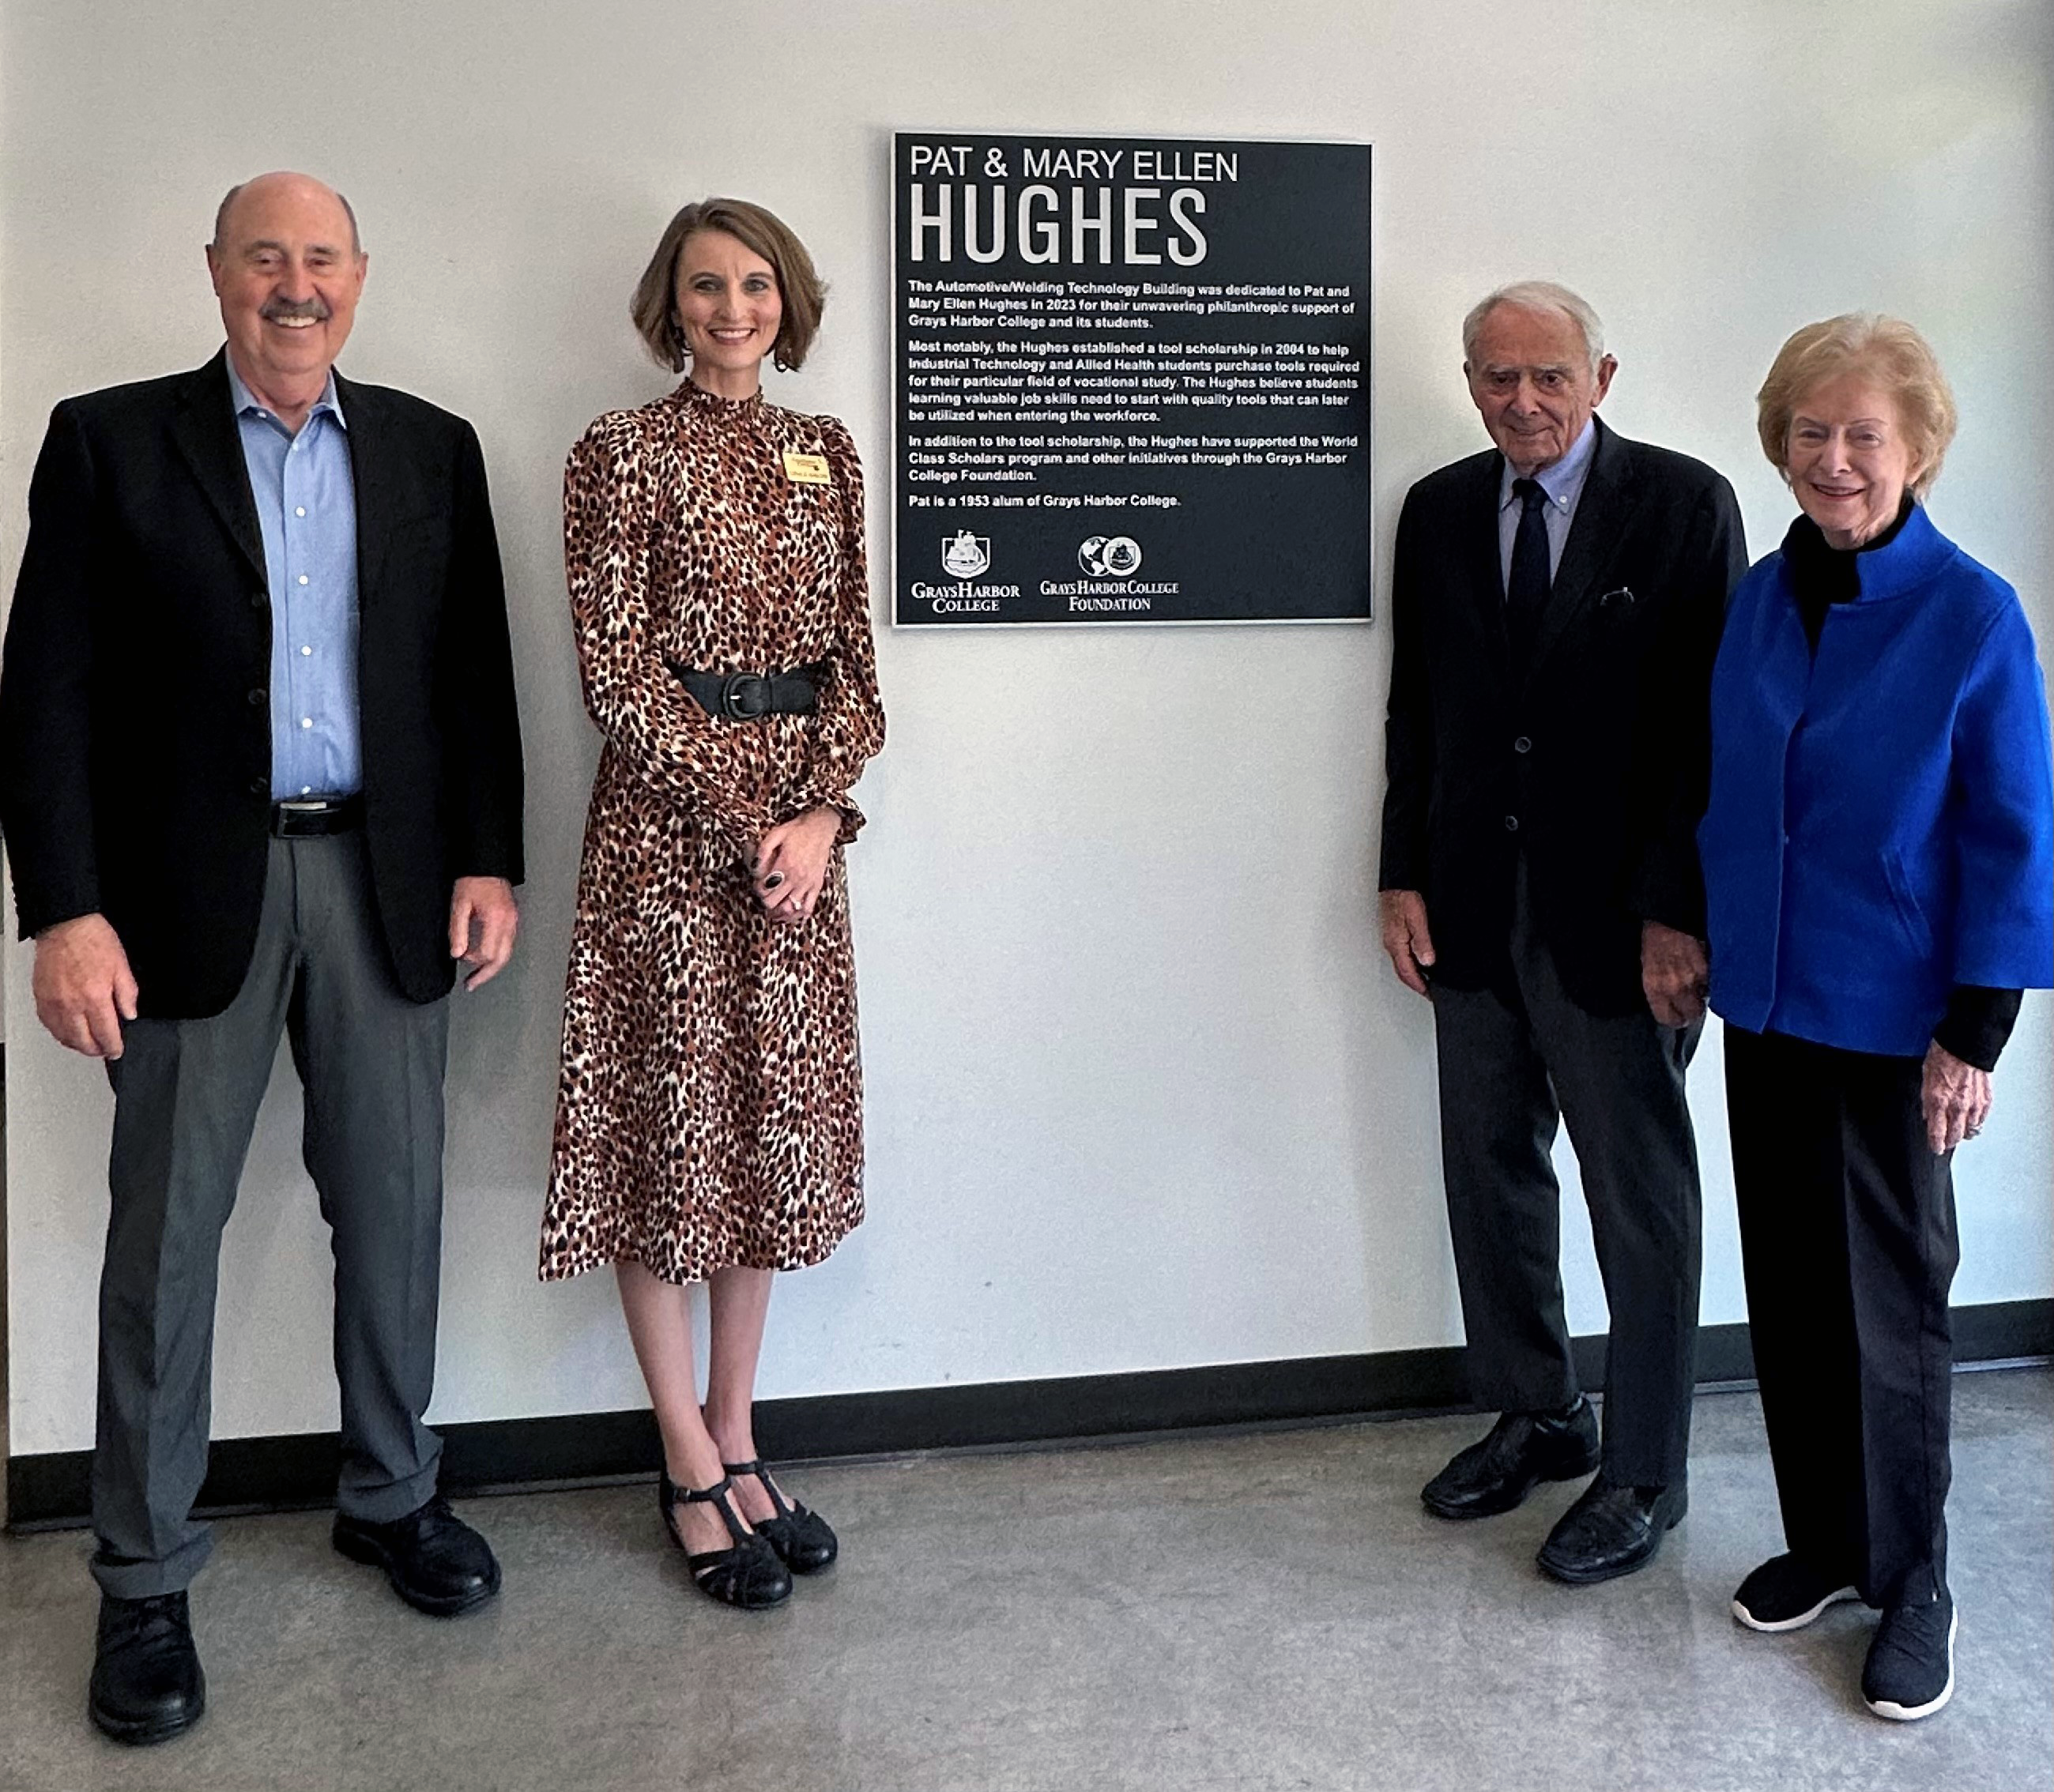 Dr. Ed Brewster, Grays Harbor College President, Lisa J. Smith, Grays Harbor College Foundation Executive Director, Pat Hughes, and Mary Ellen Hughes 